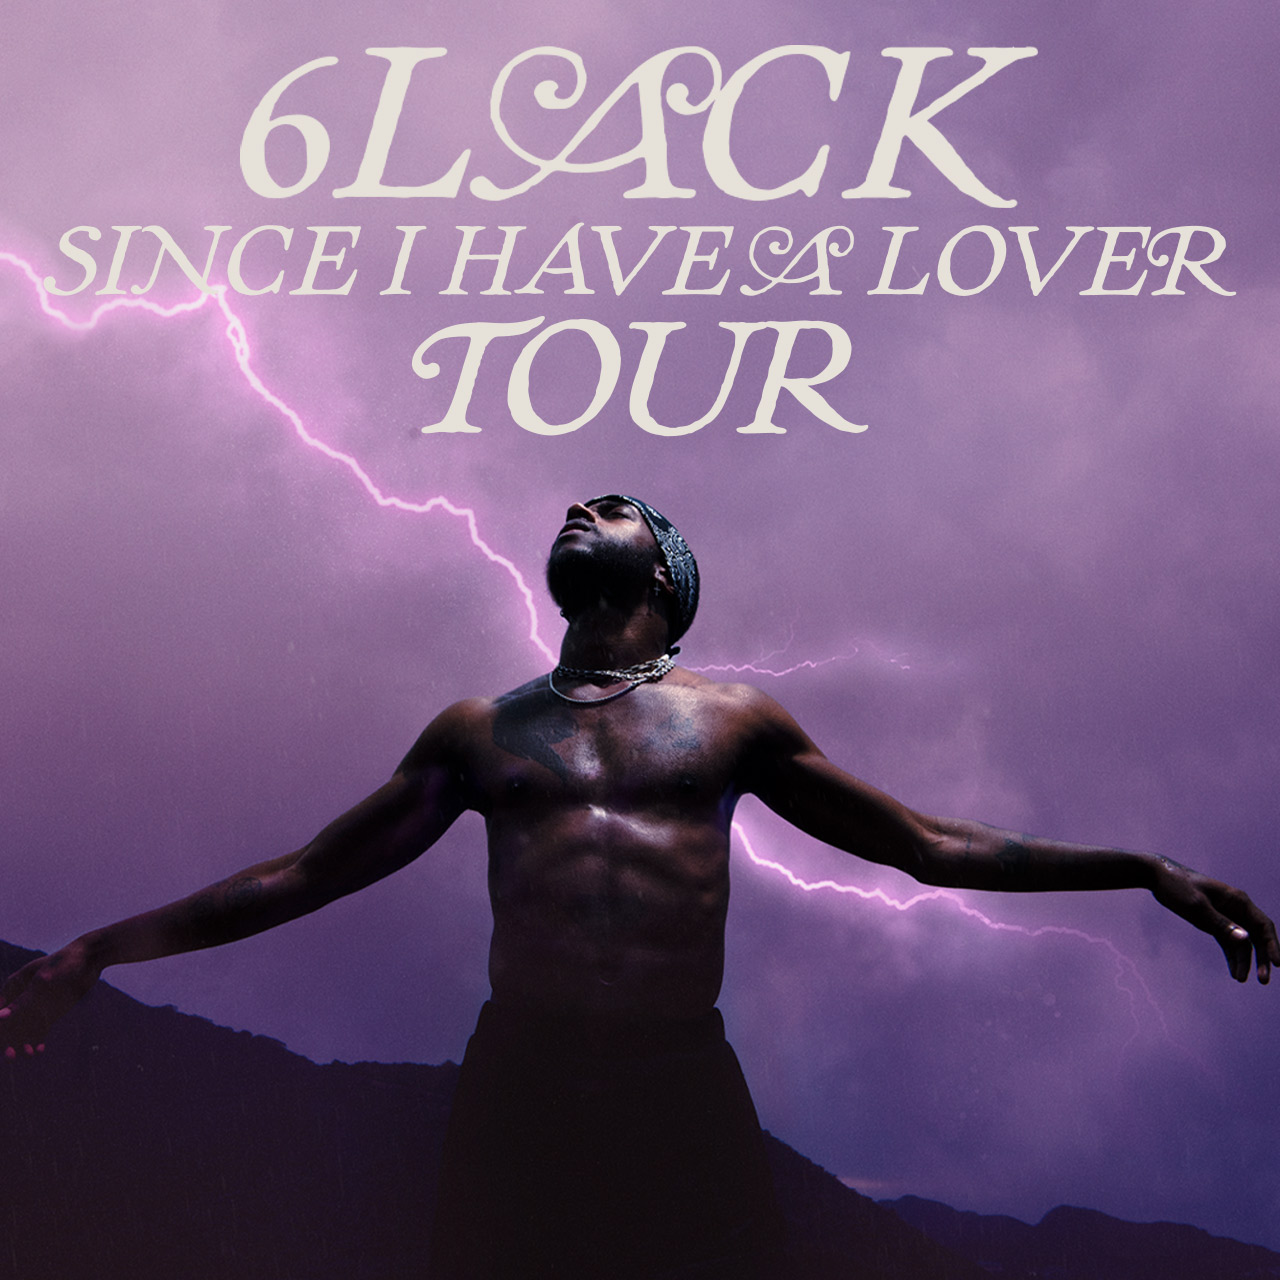 Since I Have A Lover Tour